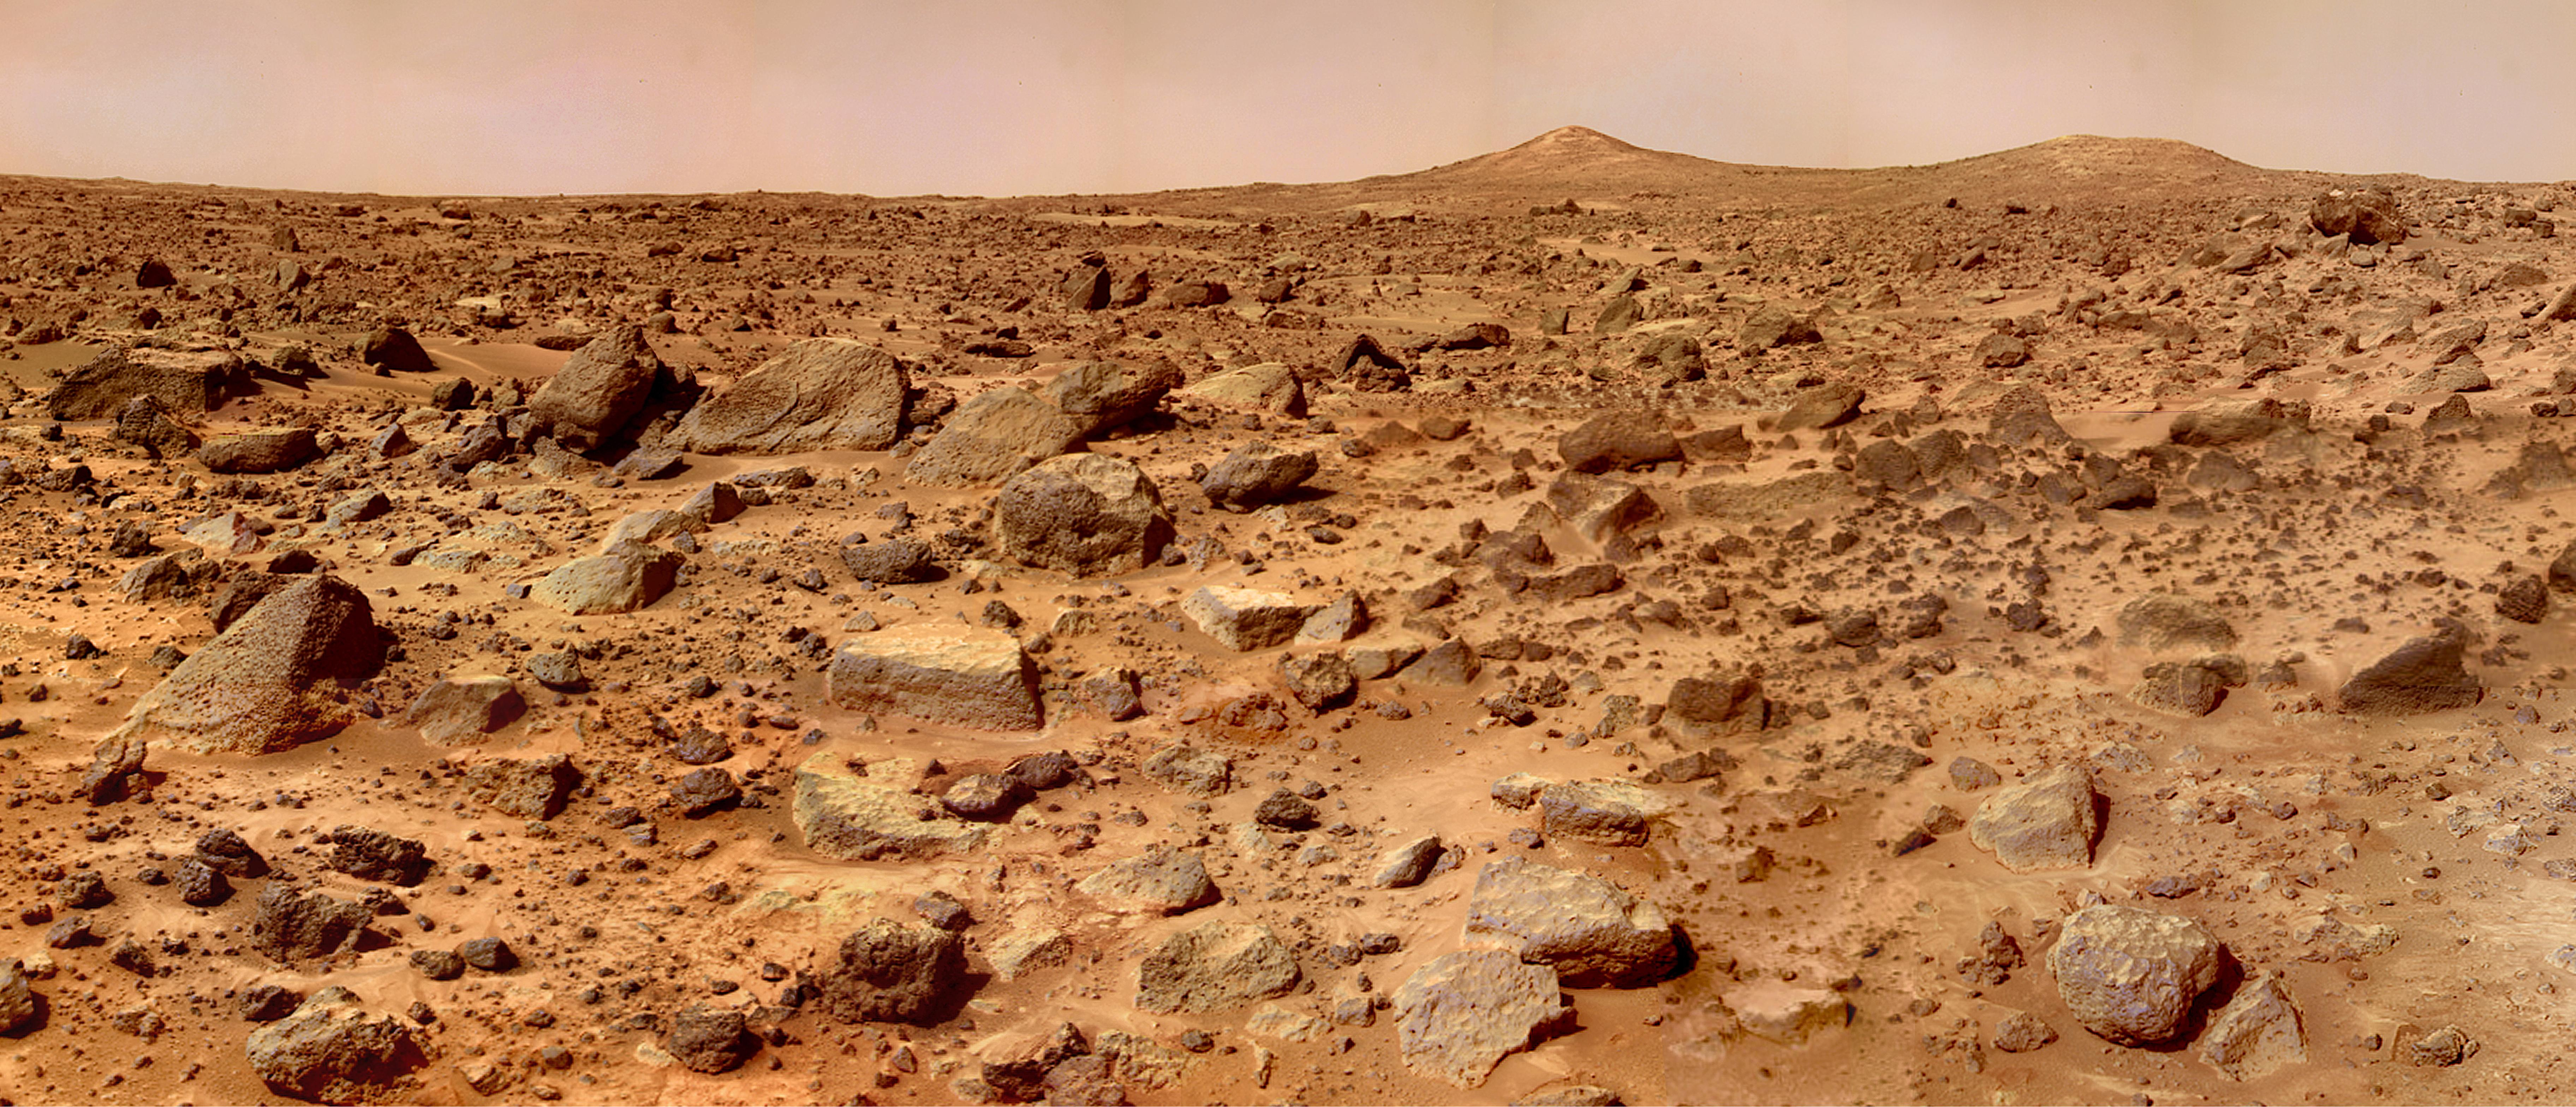 Image of the rocky surface of Mars. July 14, 2009.